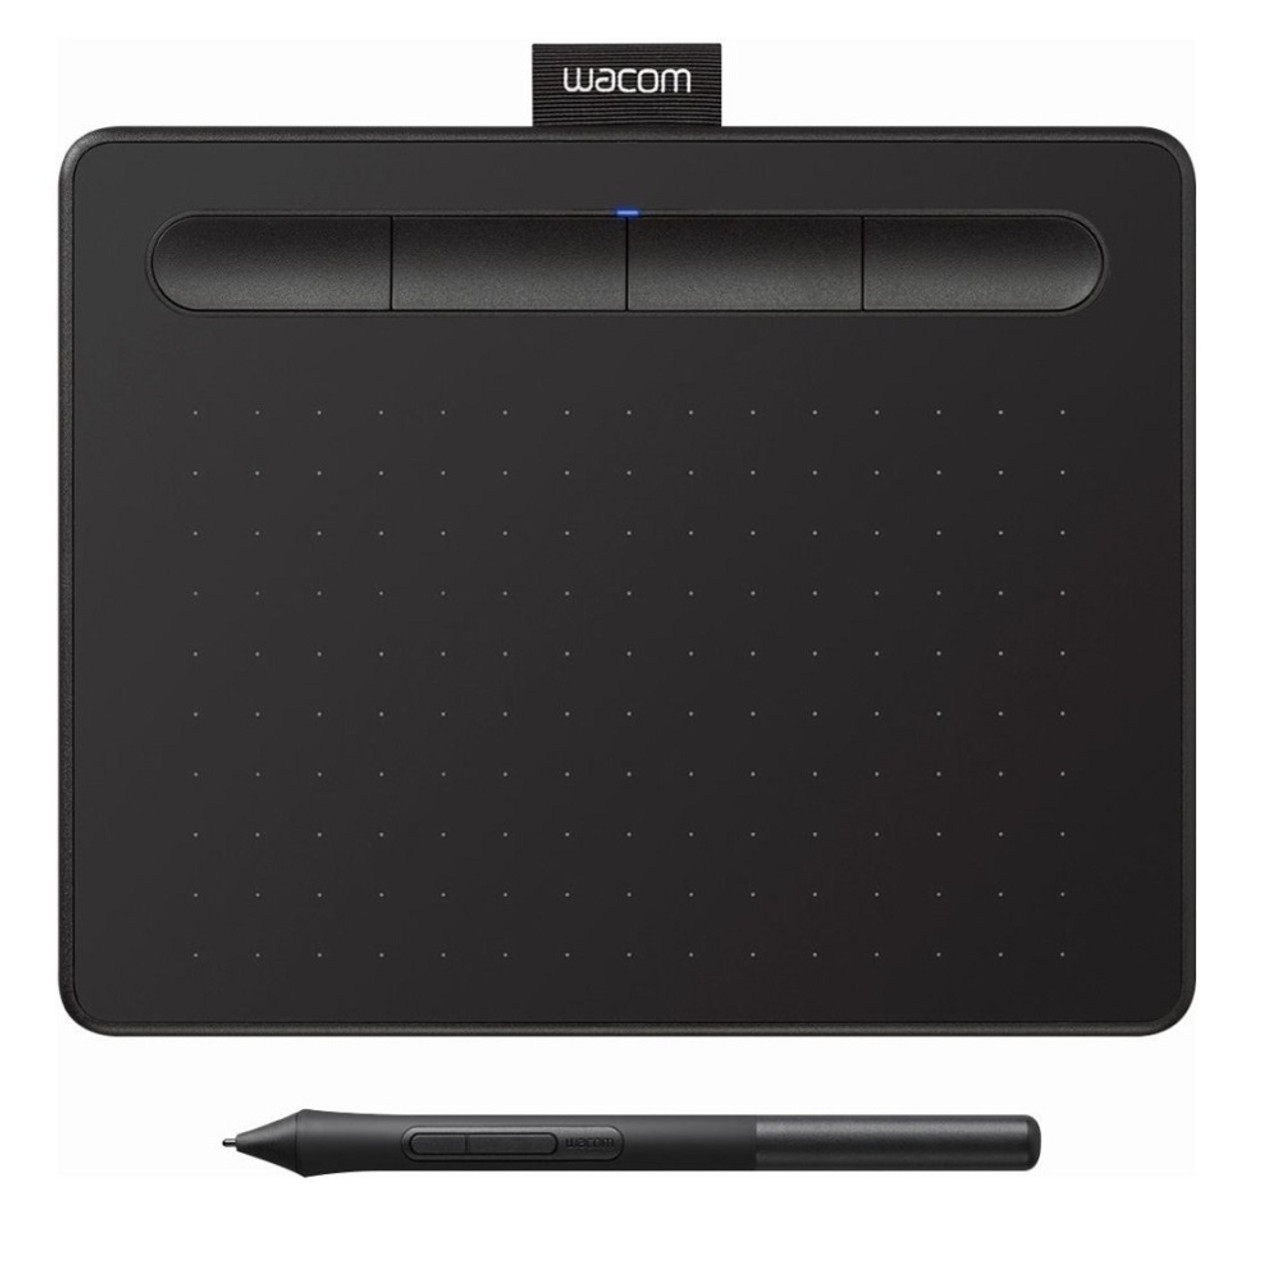 Wacom - Intuos Drawing Tablet (Small) with 3 Bonus Software included - Black